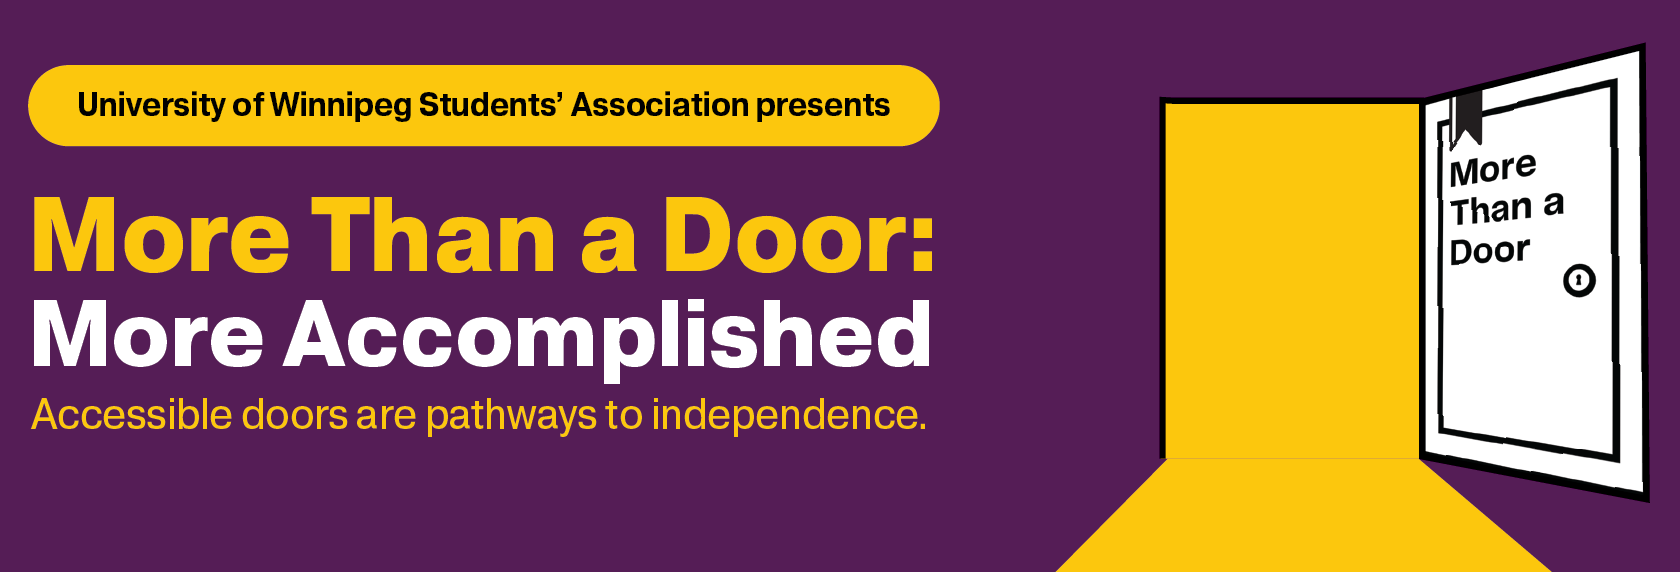 More Than a Door: More Accomplished